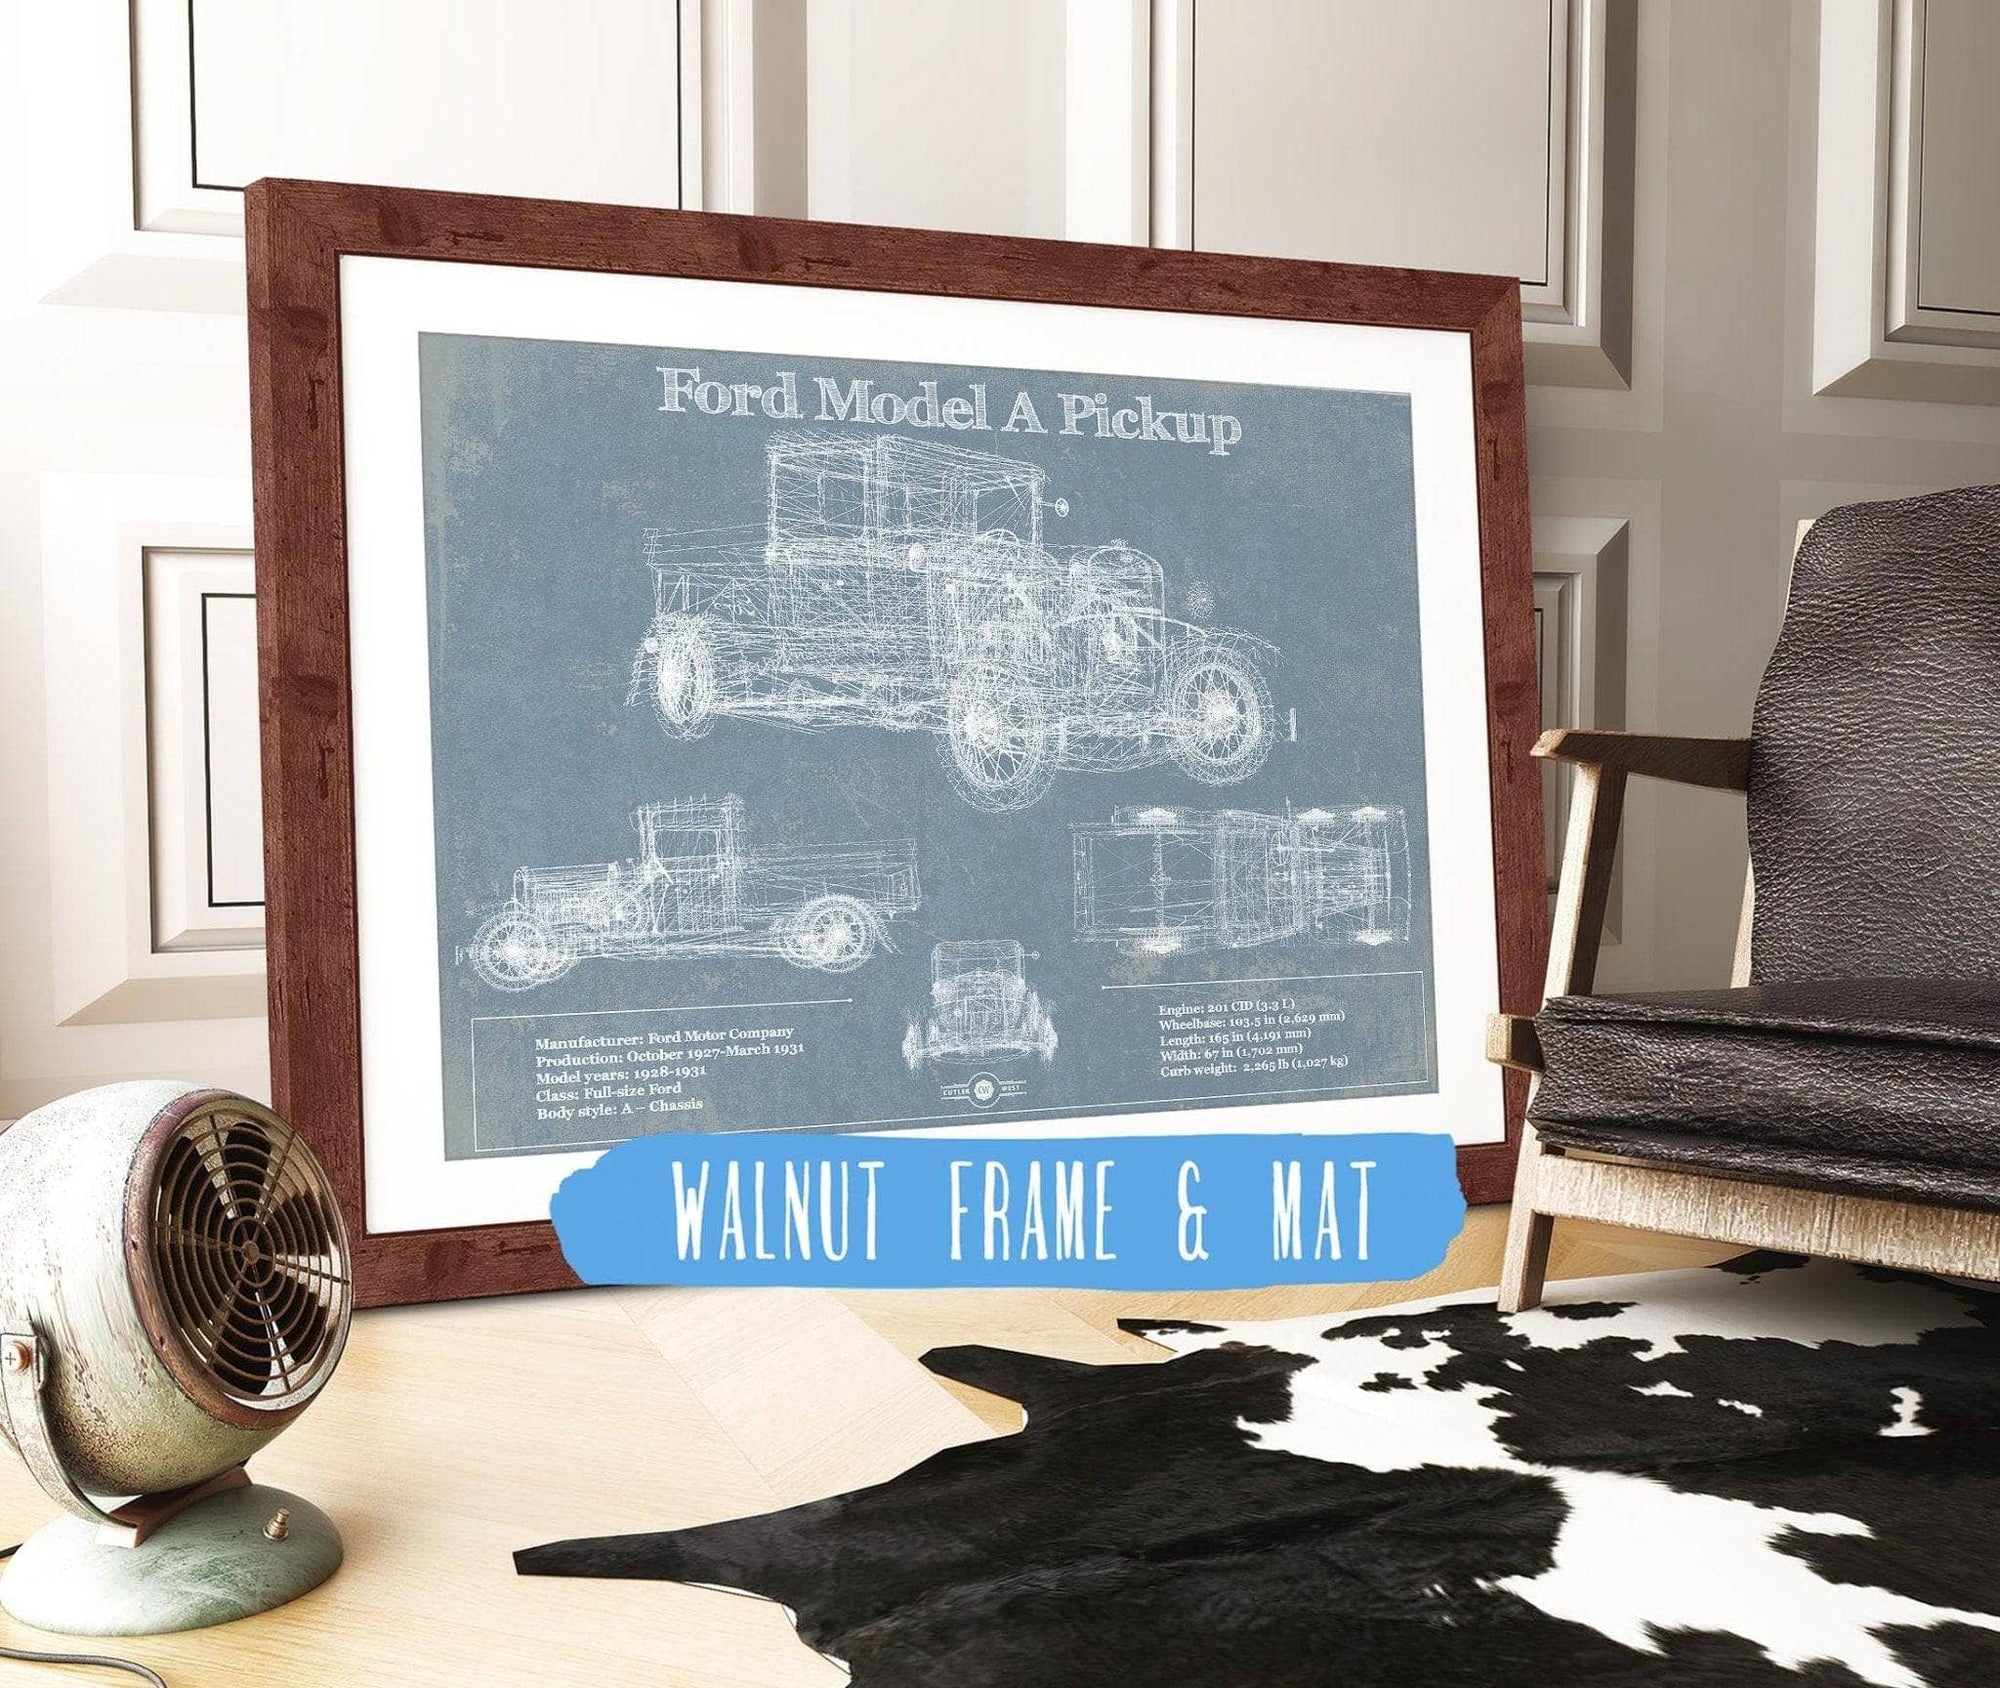 Cutler West Ford Collection 14" x 11" / Walnut Frame & Mat Ford Model A Pickup Vintage Blueprint Auto Print 833110113_54747